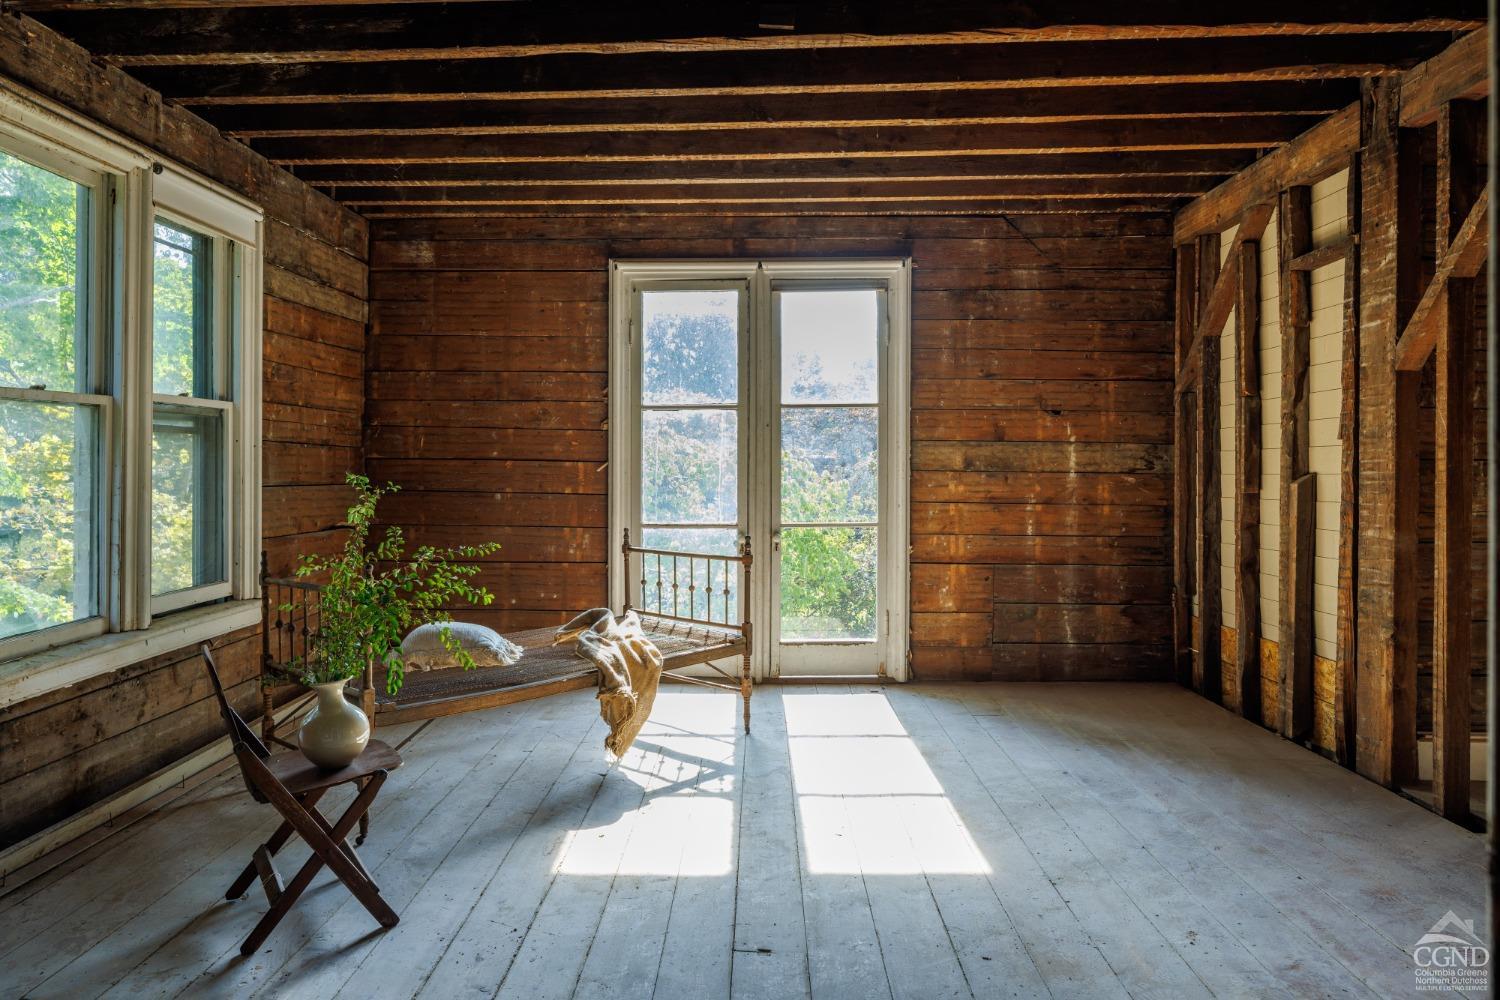 a view of a porch with wooden floor and a potted plant